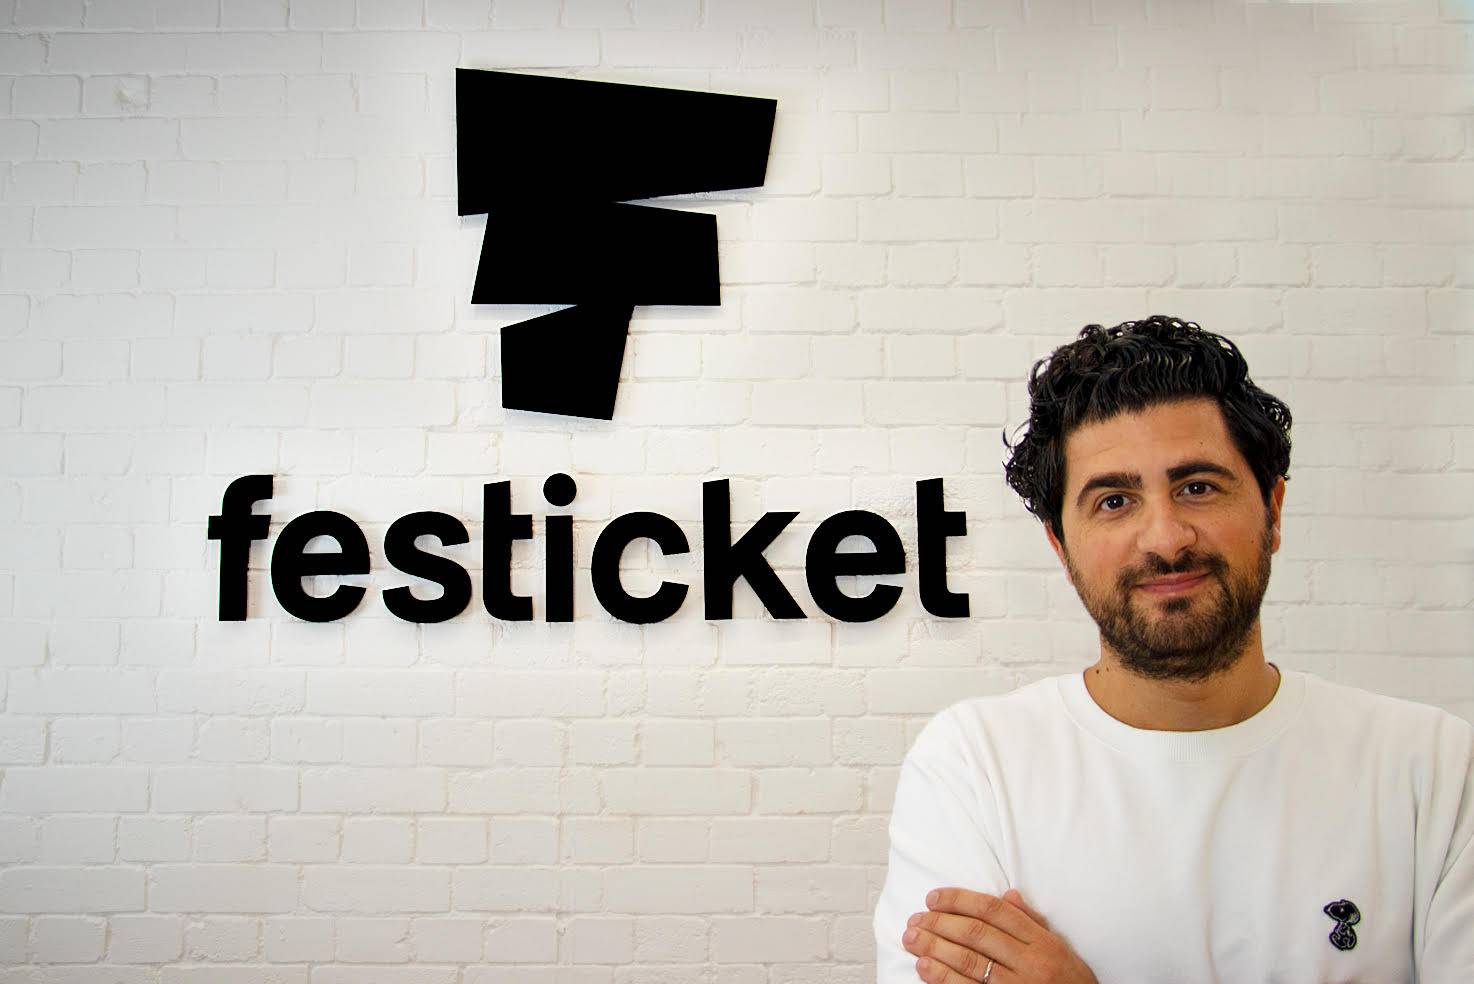 Festivals, mergers and COVID-19: An interview with Zack Sabban, CEO at Festicket